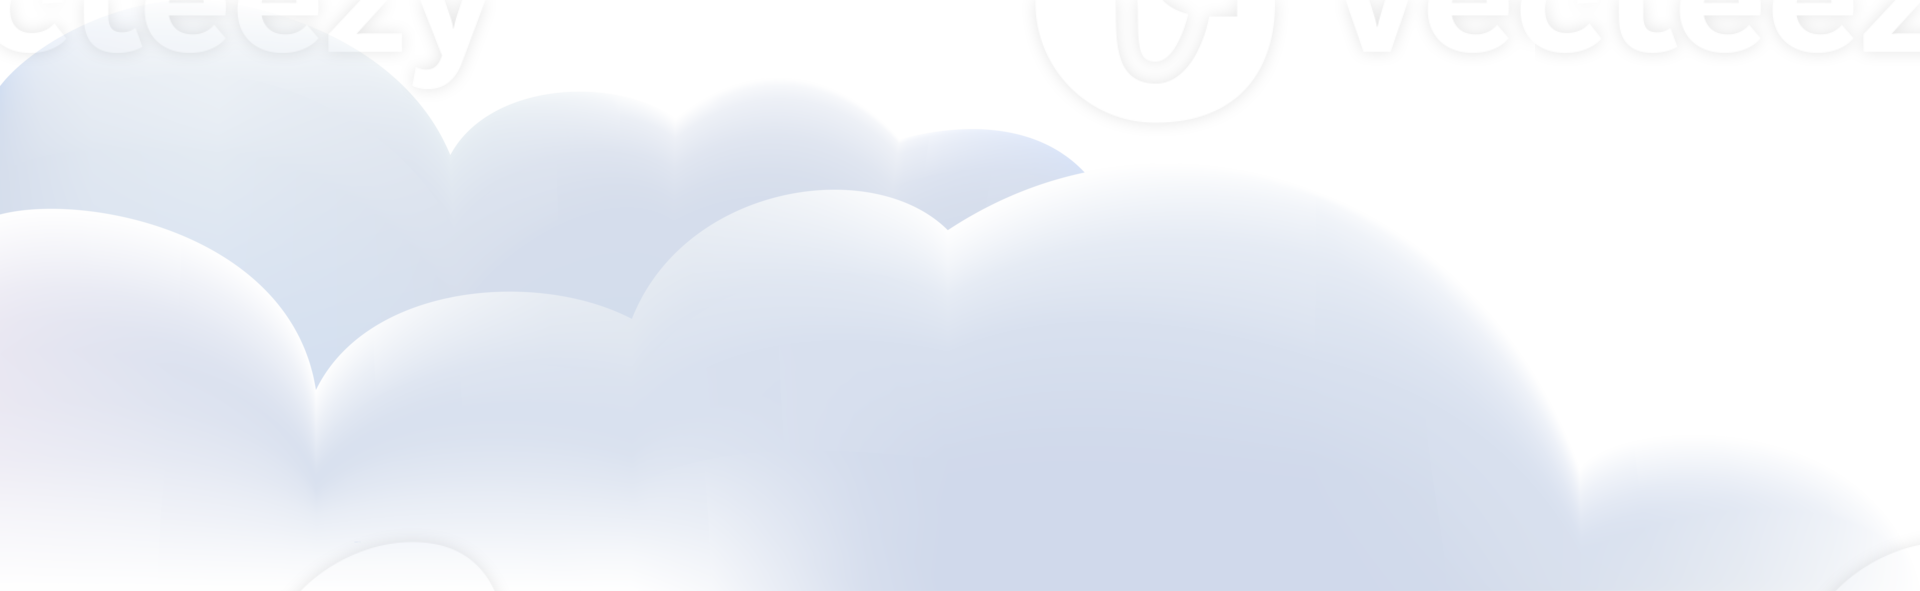 3d render cloud on white background,texture, icon vector illustration png